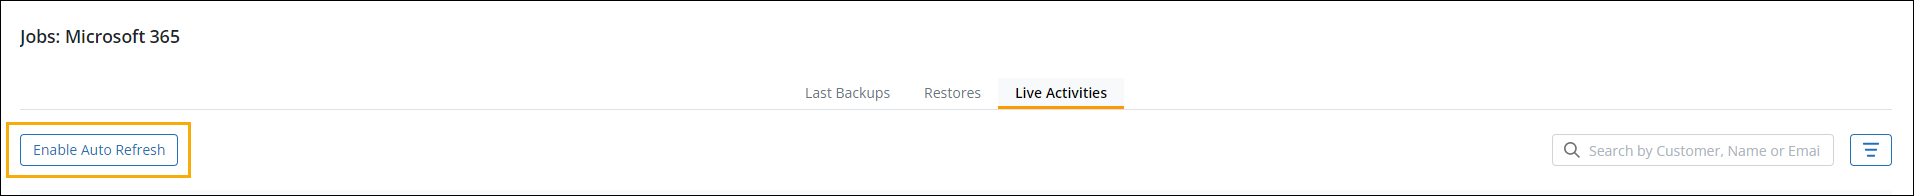 Enable Auto Refresh M365.png